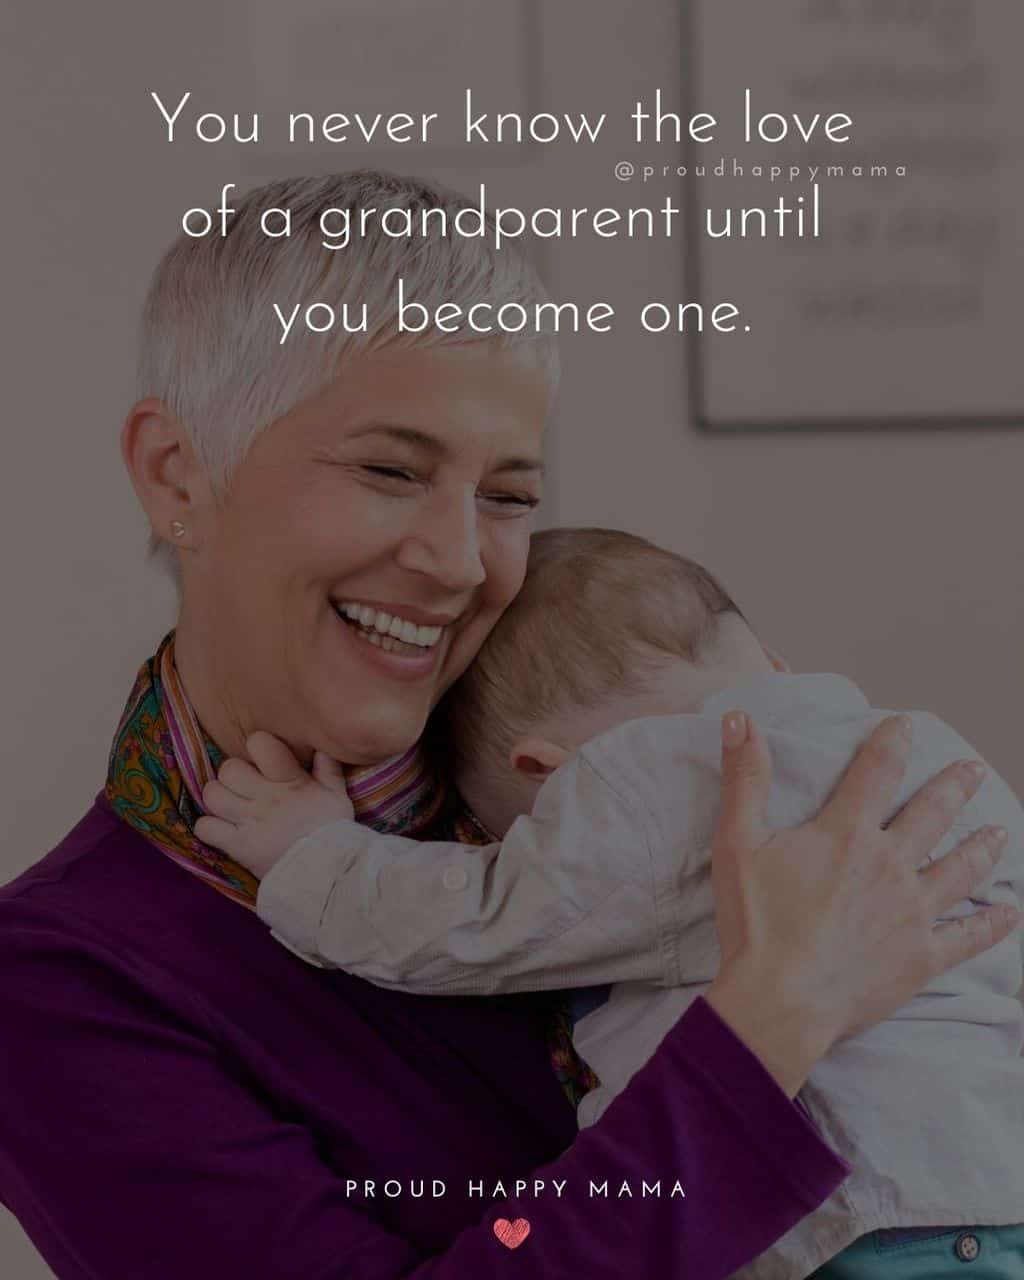 Grandparent Quotes – You never know the love of a grandparent until you become one.’